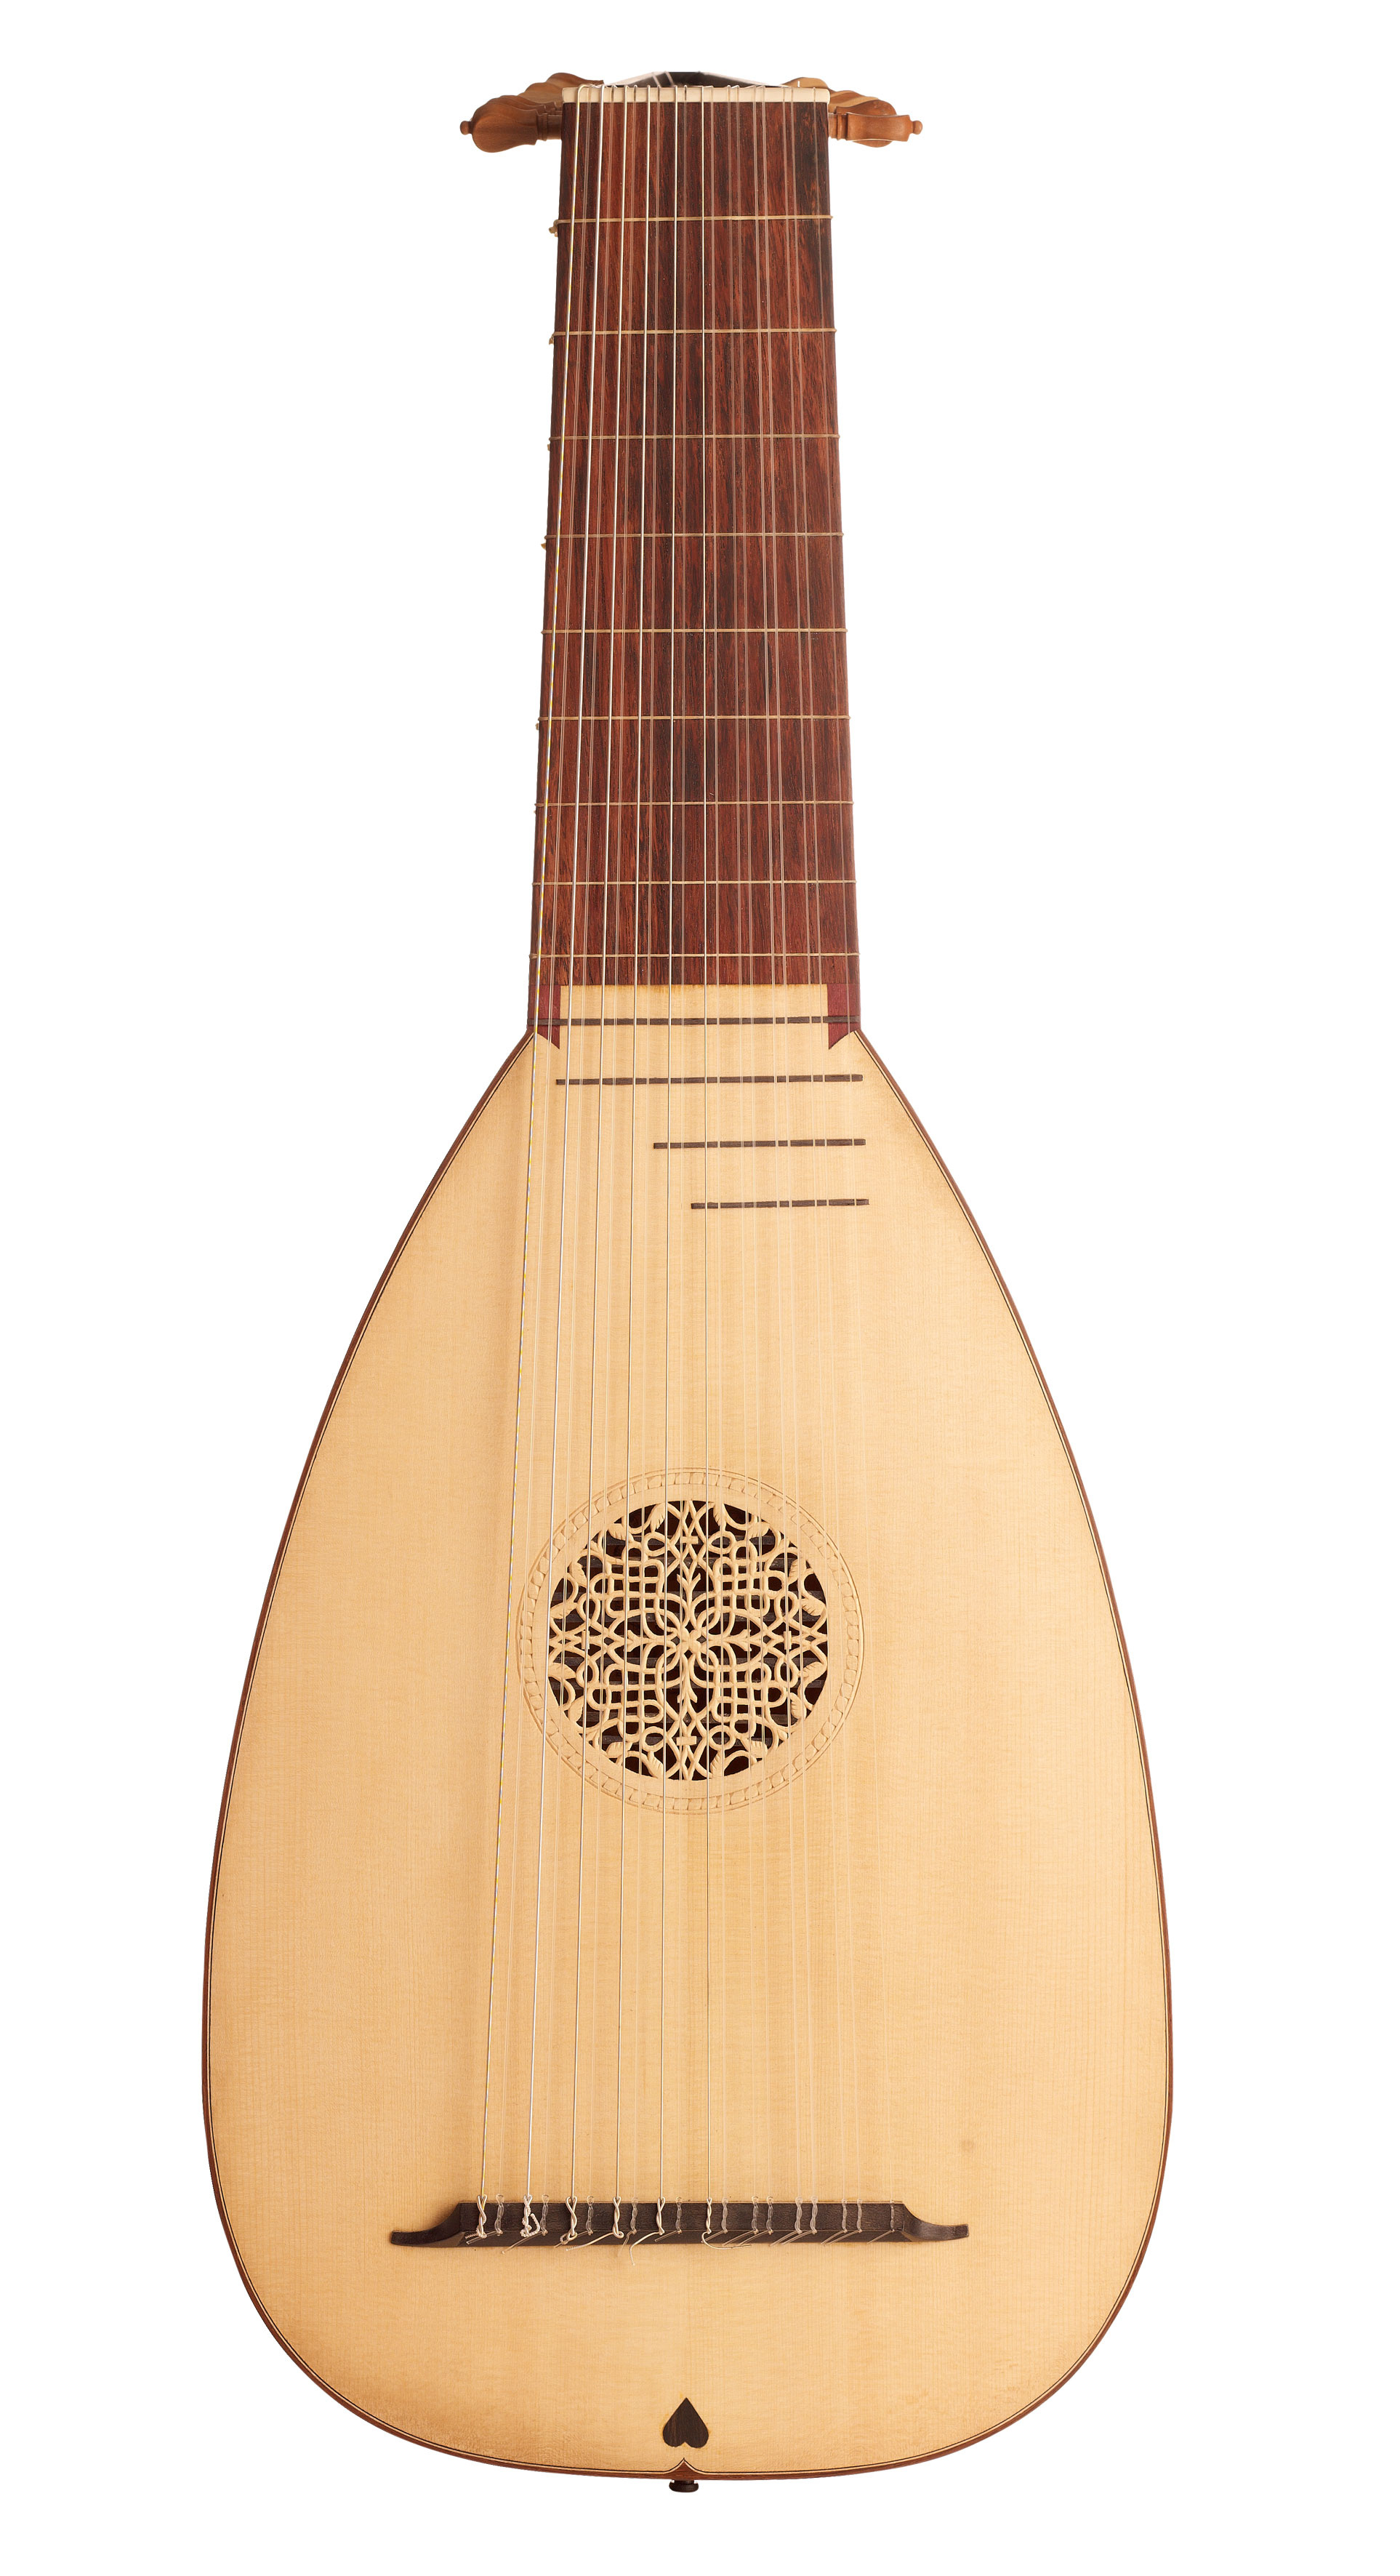 Lute: Renaissance, Plucked String Instrument With A Neck And A Deep Round Back, Pegs Or Posts At The End Of The Neck. 1930x3550 HD Wallpaper.